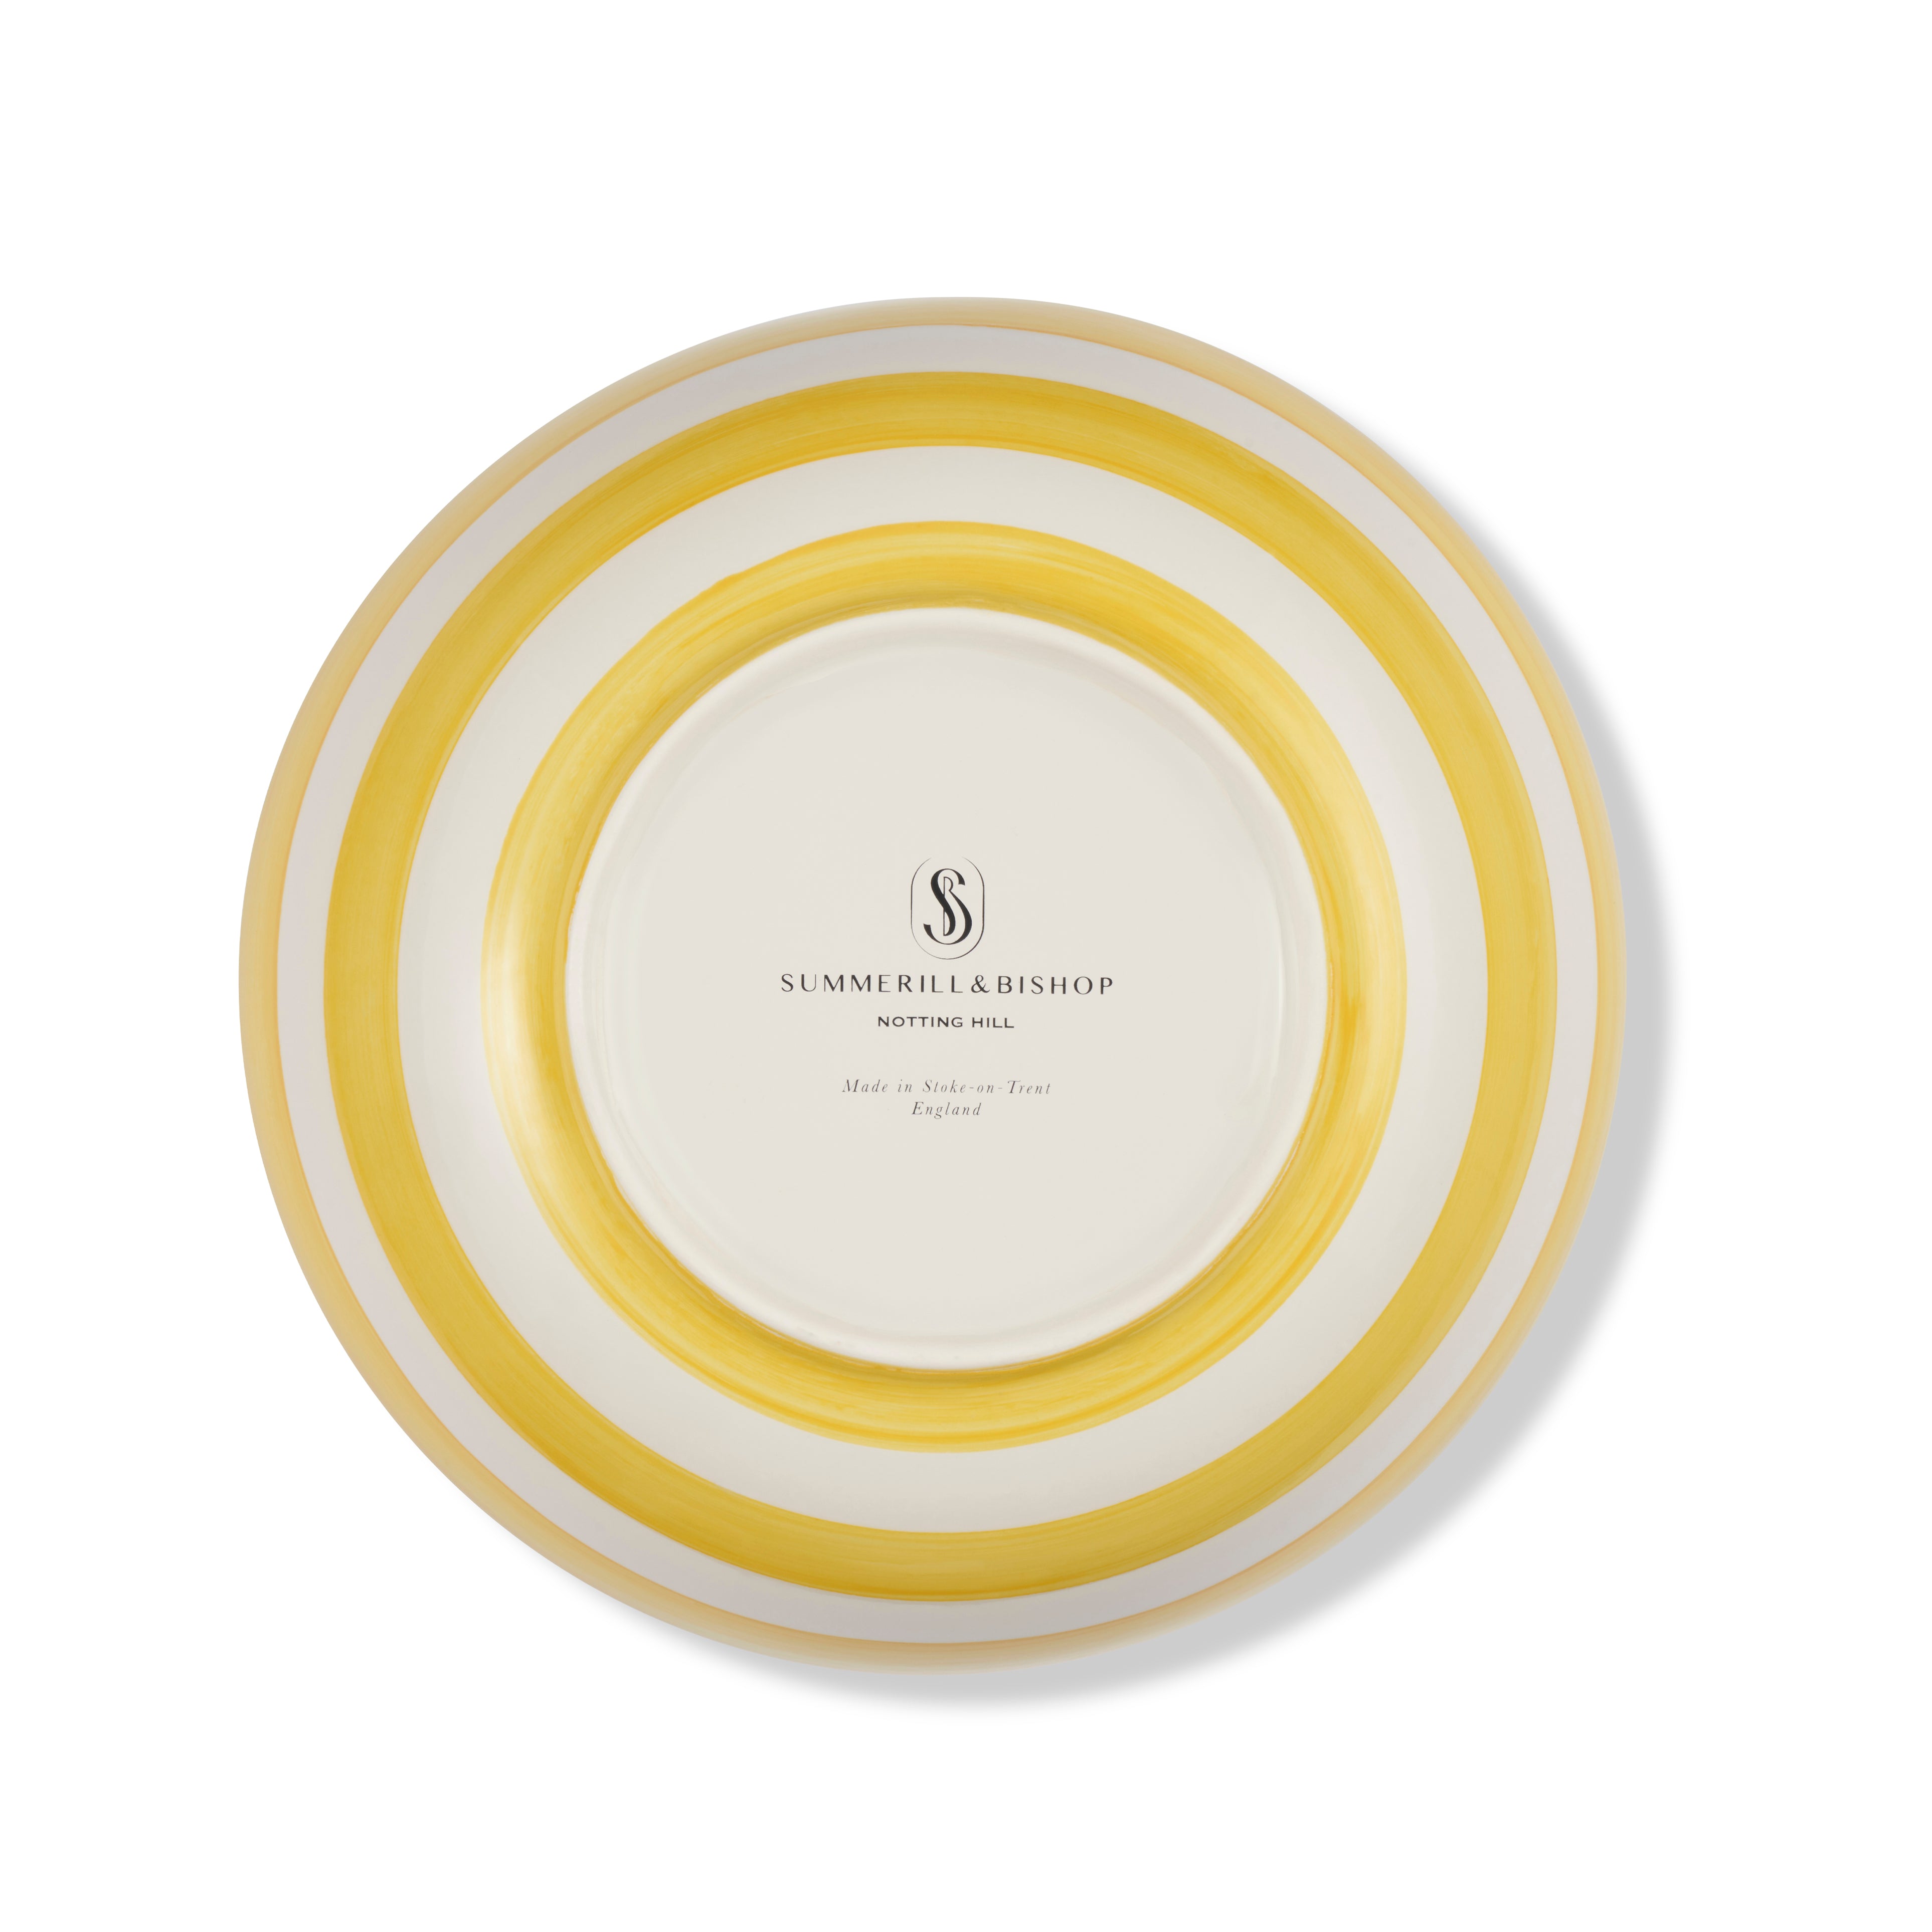 S&B Classic Stripe Serving Bowl in Yellow and White